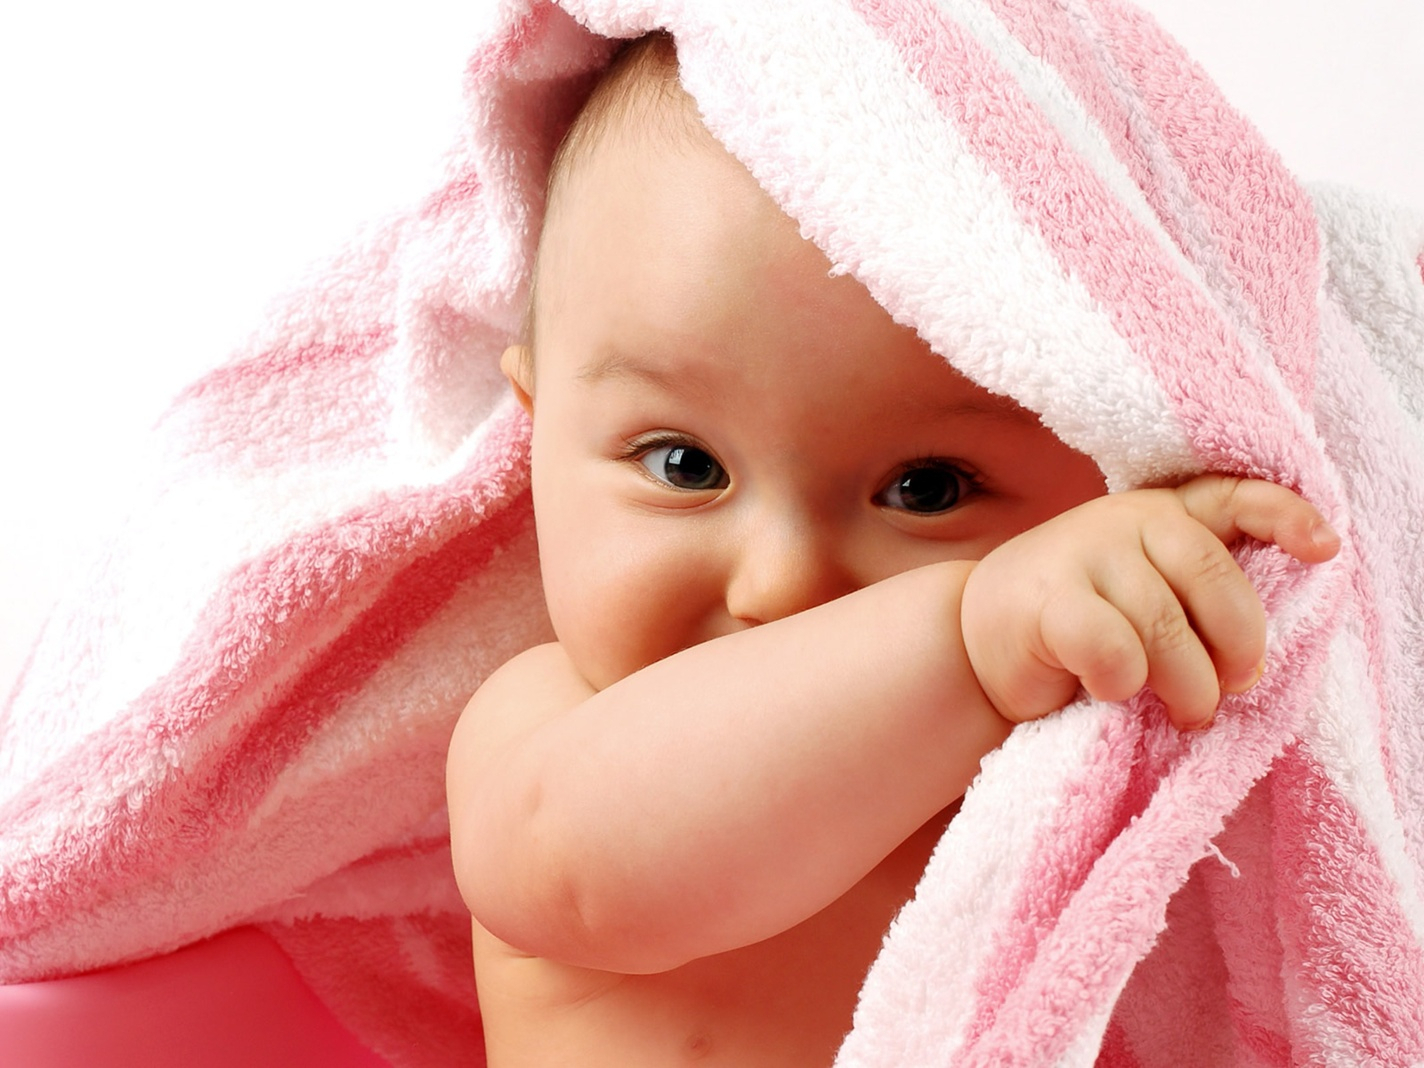 Cute Baby Image New - Cute Baby Pictures Download Free - HD Wallpaper 